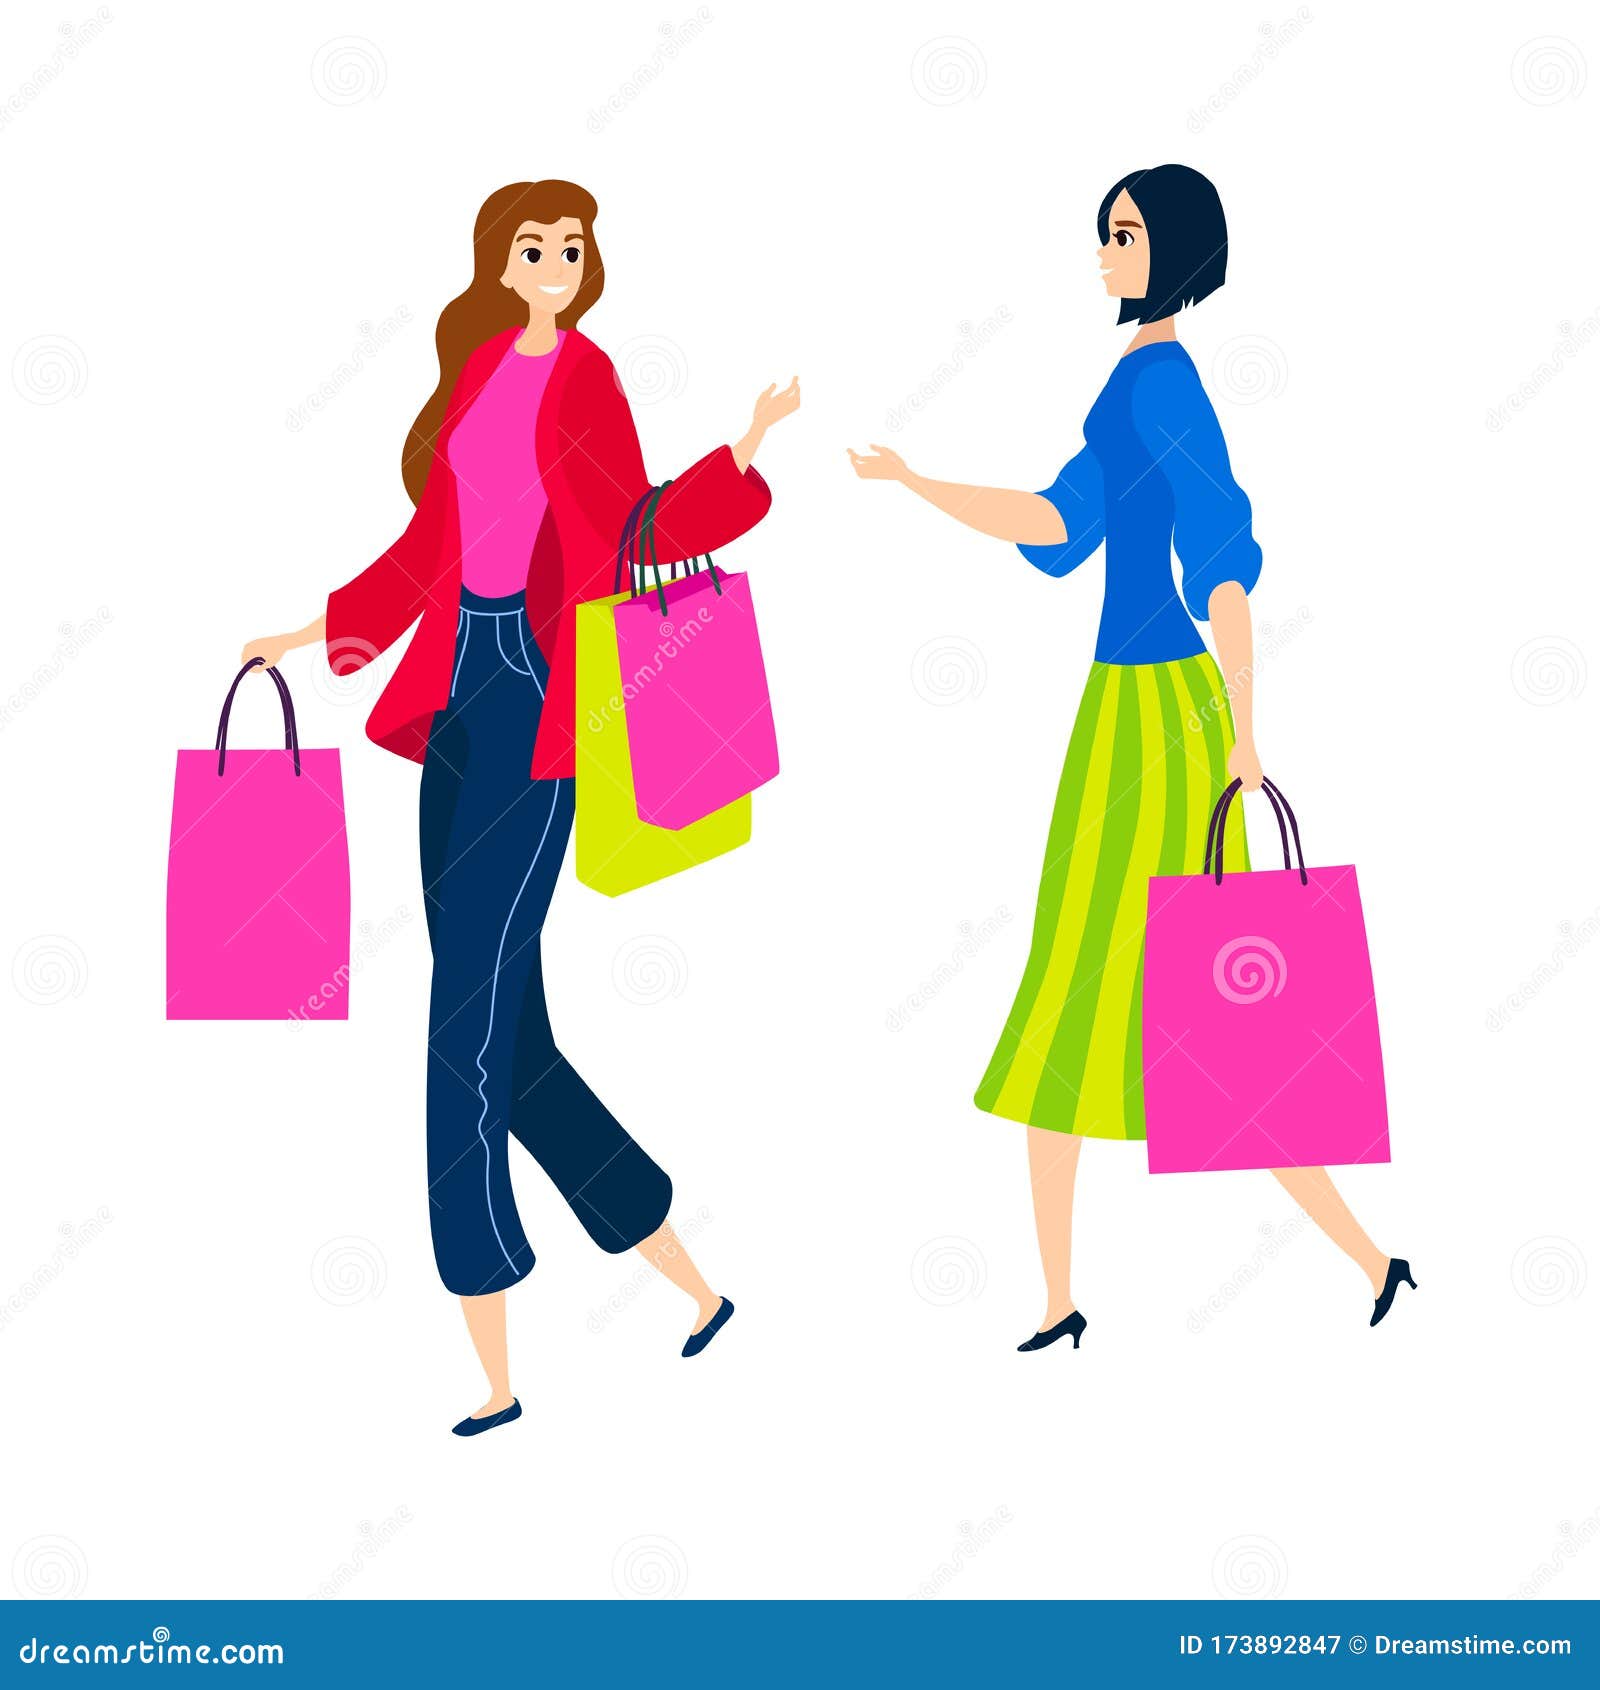 Vector Illustration Isolated on White Cartoon Flat Girls Go Shopping  Friends or Lesbians with Bags Stock Vector - Illustration of design, girl:  173892847